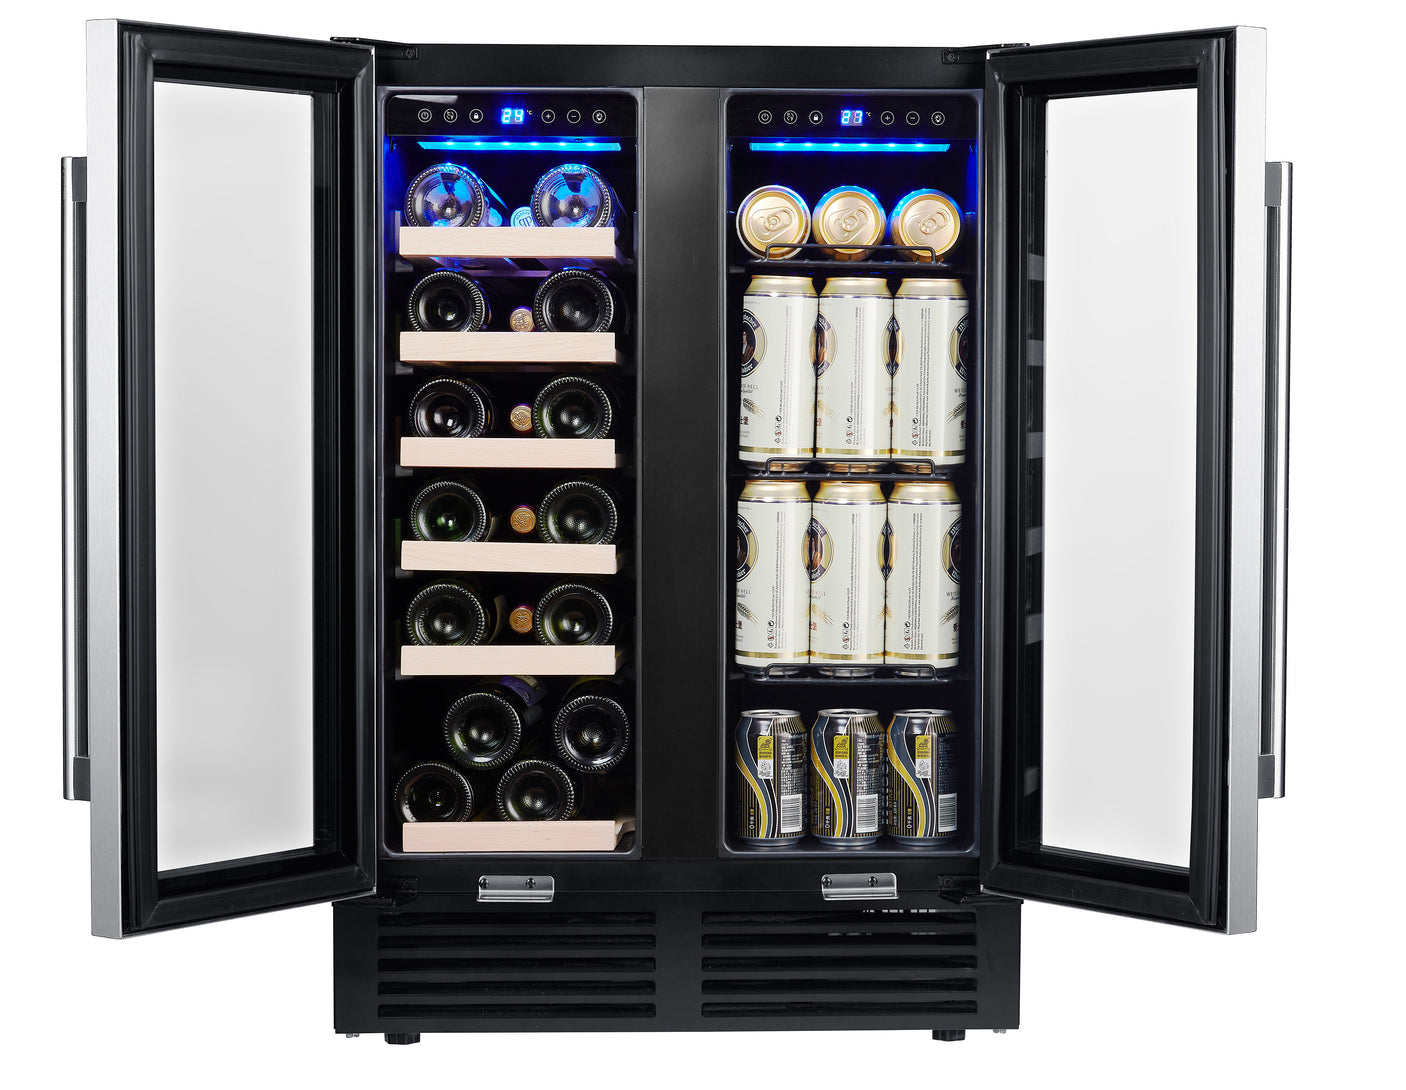 SOTOLA  24'' Wine Cooler Refrigerator - Dual Zone Built-in or Freestanding Fridge with Stainless Steel Tempered Glass Door and Temperature Memory Function